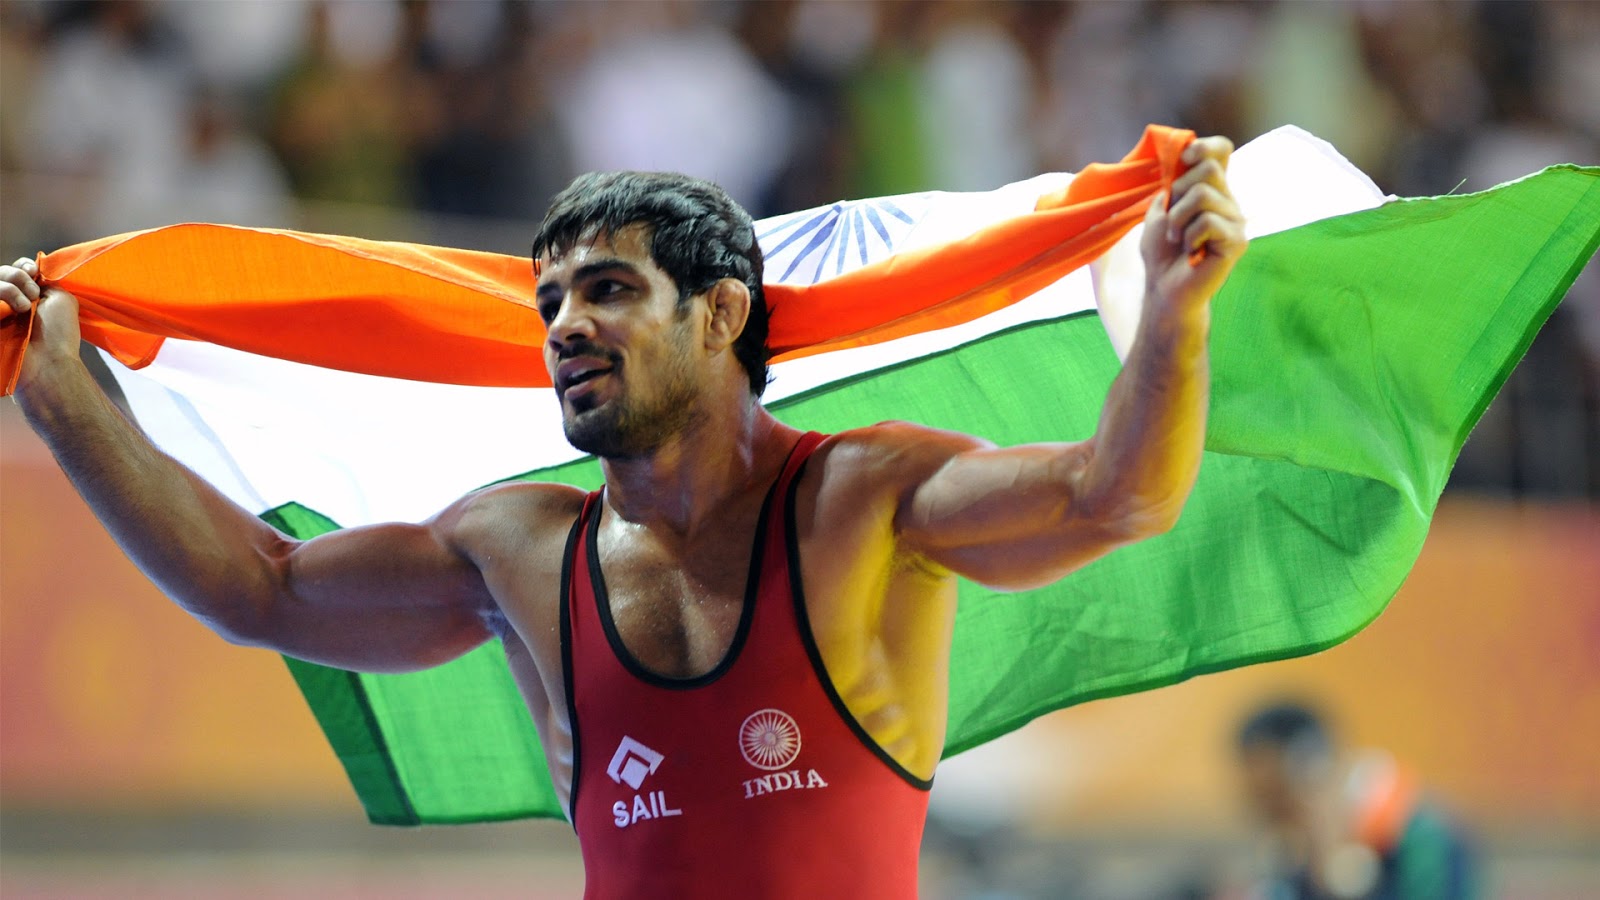 The 74-kg category is famous for the overwhelming presence of iconic grappler Sushil Kumar.